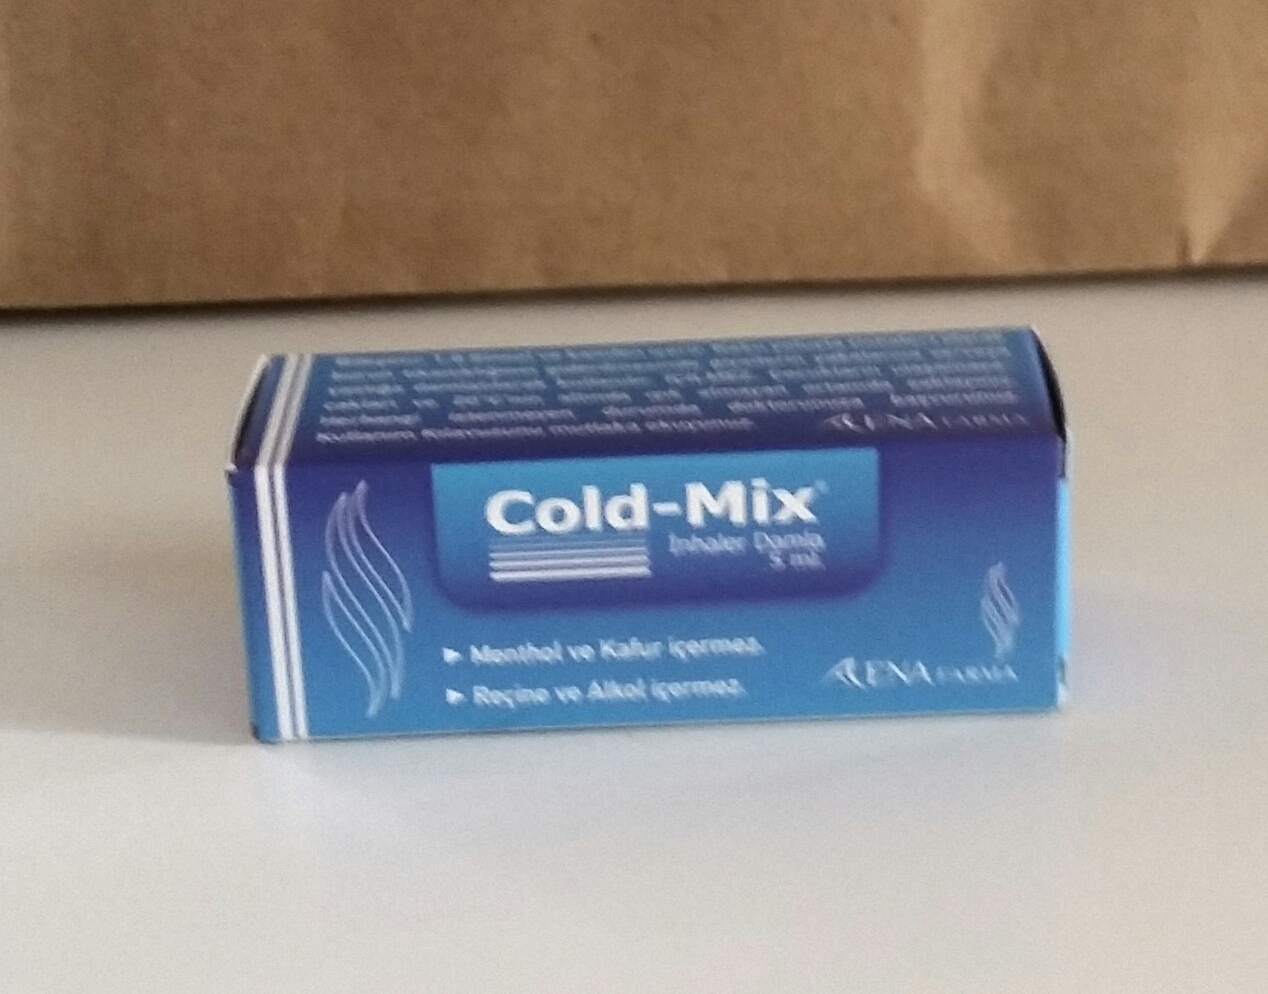 Cold mixing. Cold Mix сигареты. Cold Mix Damla. Cold Mix. Sant Cold Mix.